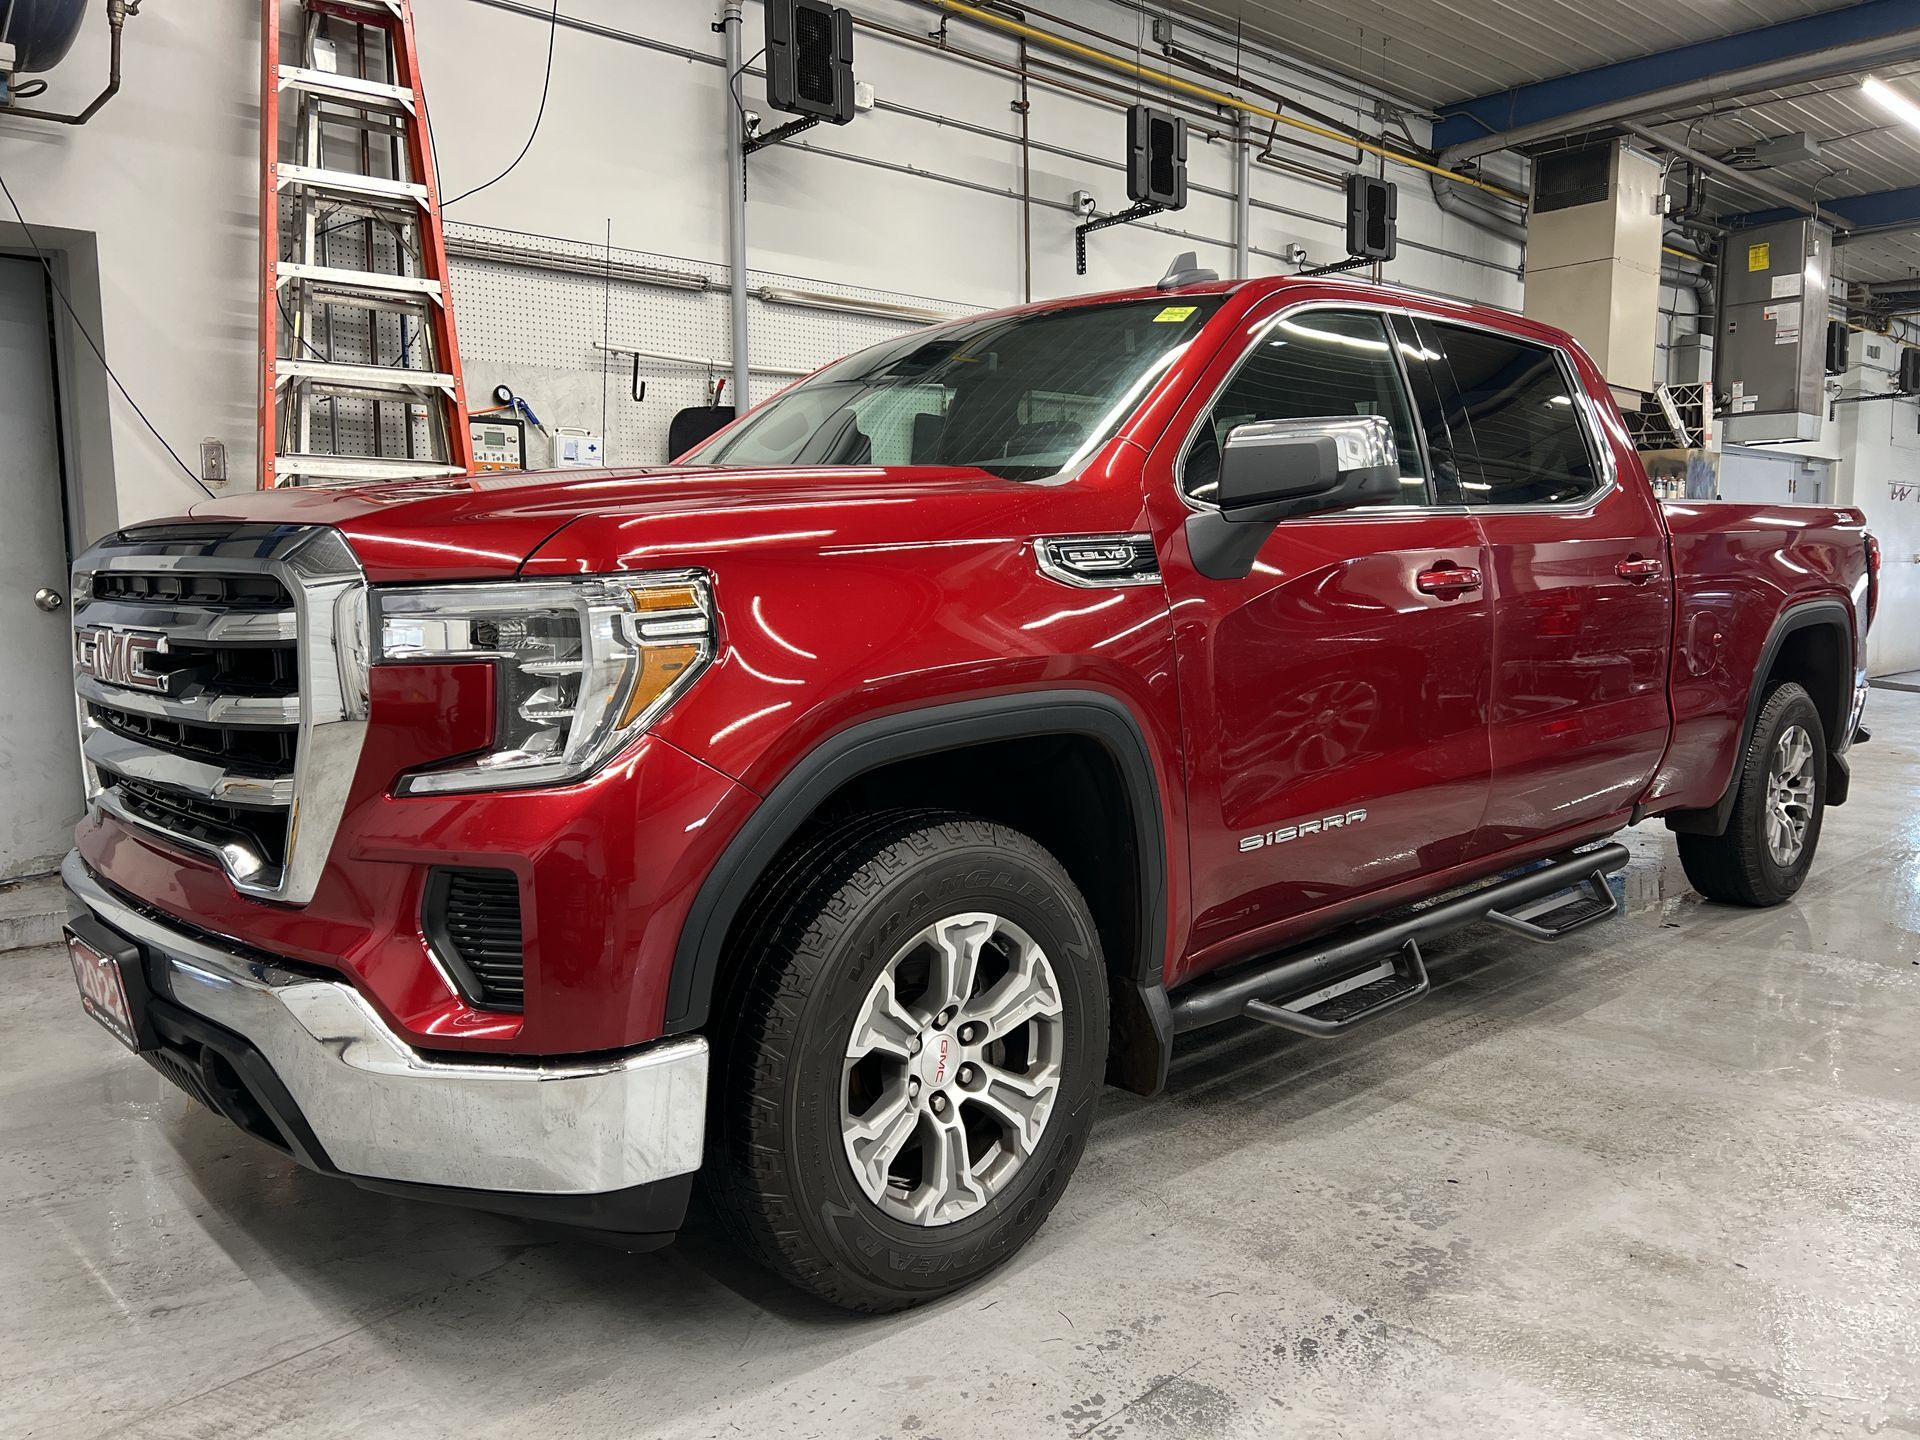 2022 GMC Sierra 1500 Limited SLE| CREW| X31 OFFROAD| 5.3L V8| MULTIPRO TAILGATE